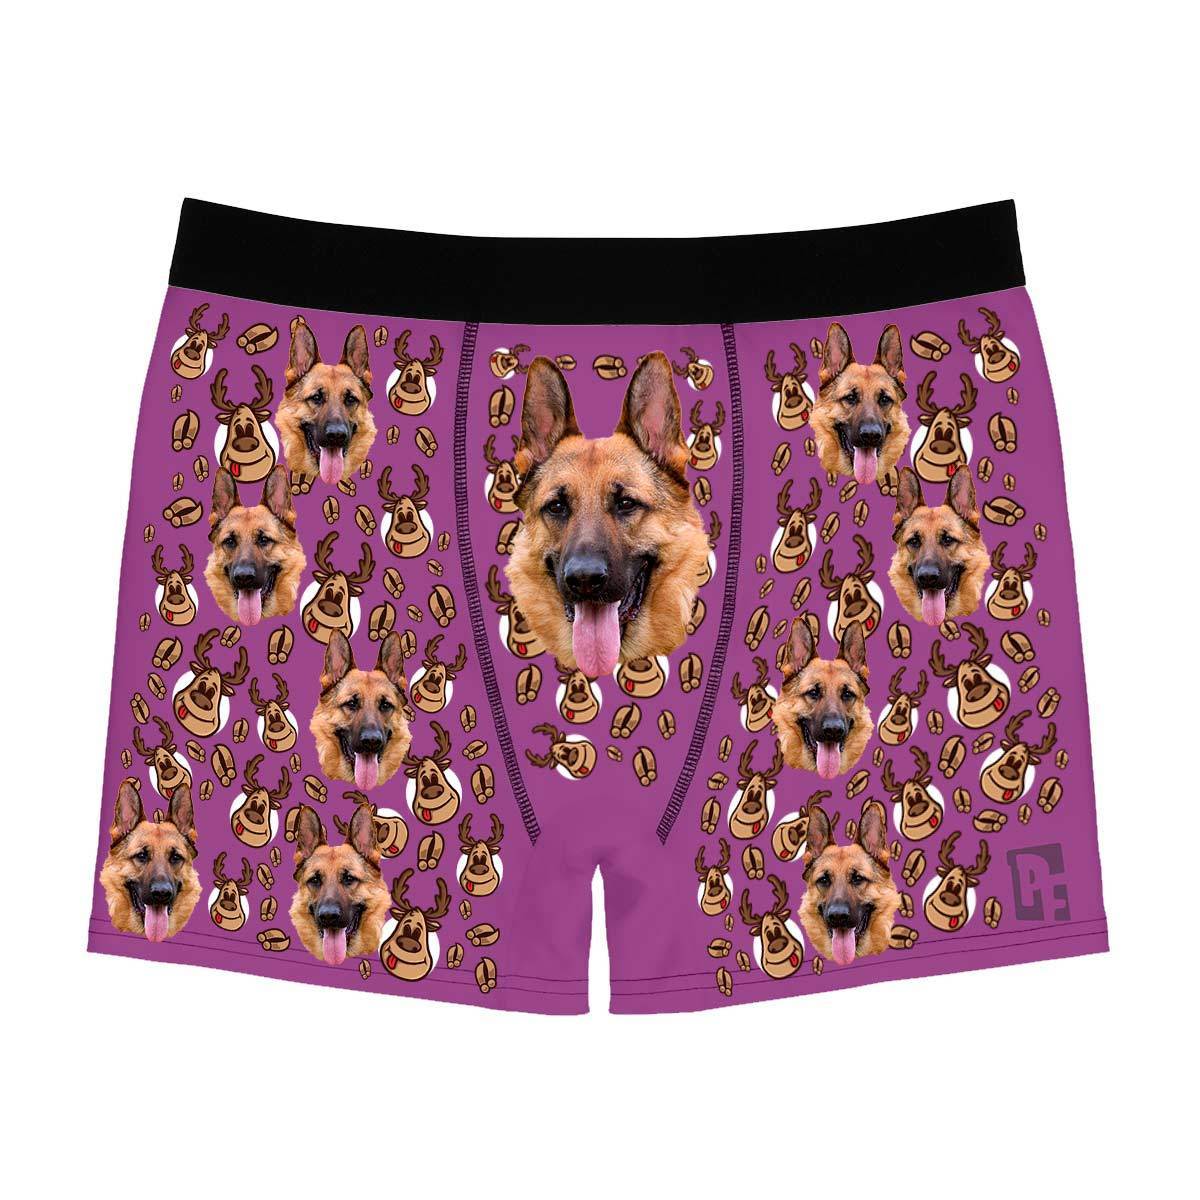 Purple Deer Hunter men's boxer briefs personalized with photo printed on them